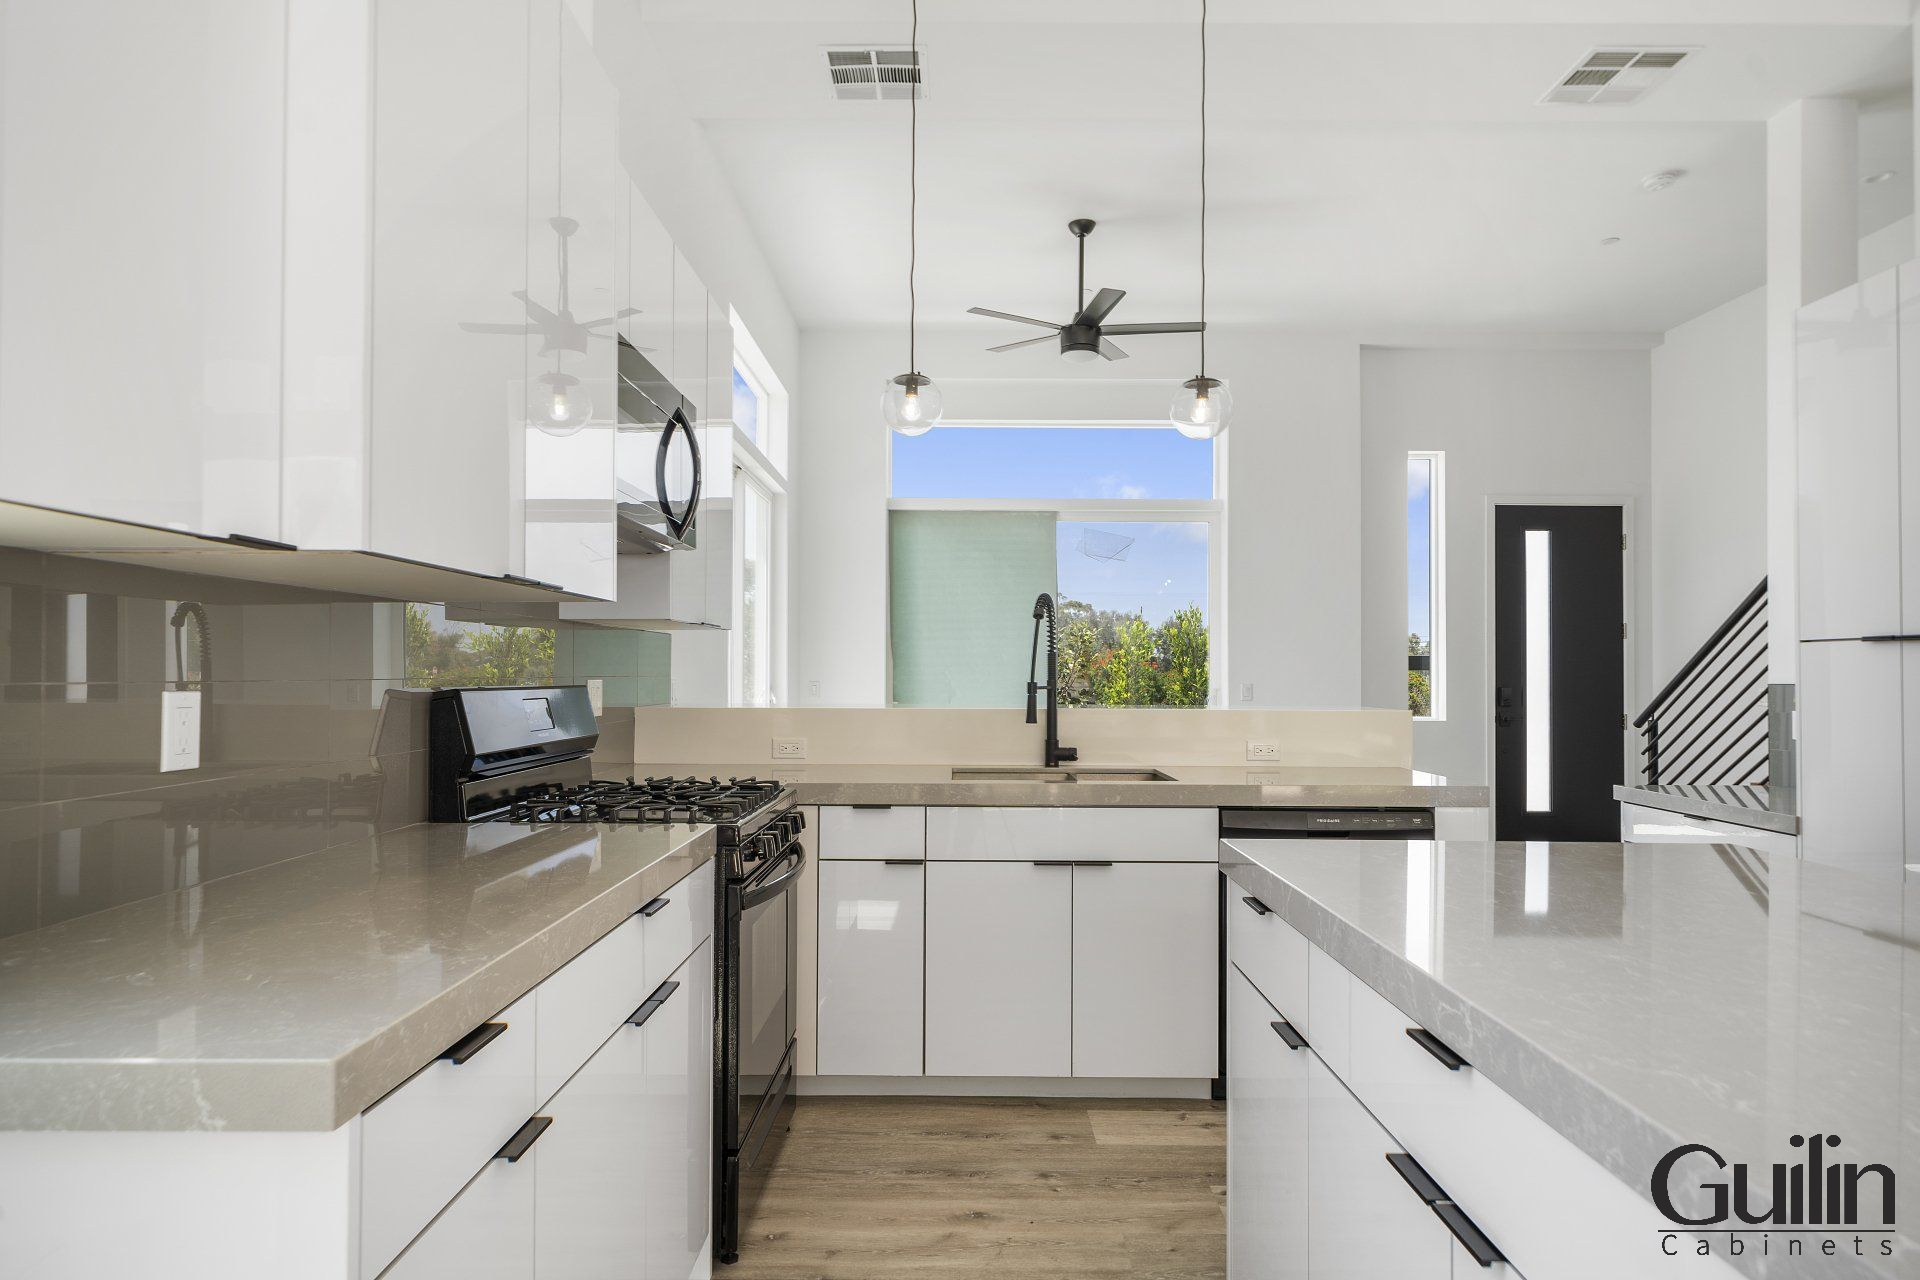 The morden kitchen design emphasizes form & function and includes a focus on the use of high-quality materials, including stainless steel, concrete, glass, and wood, with incorporates appliances with advanced technologies, reflective surfaces, and energy-efficient, to enhance its overall look and functionality of all your home.